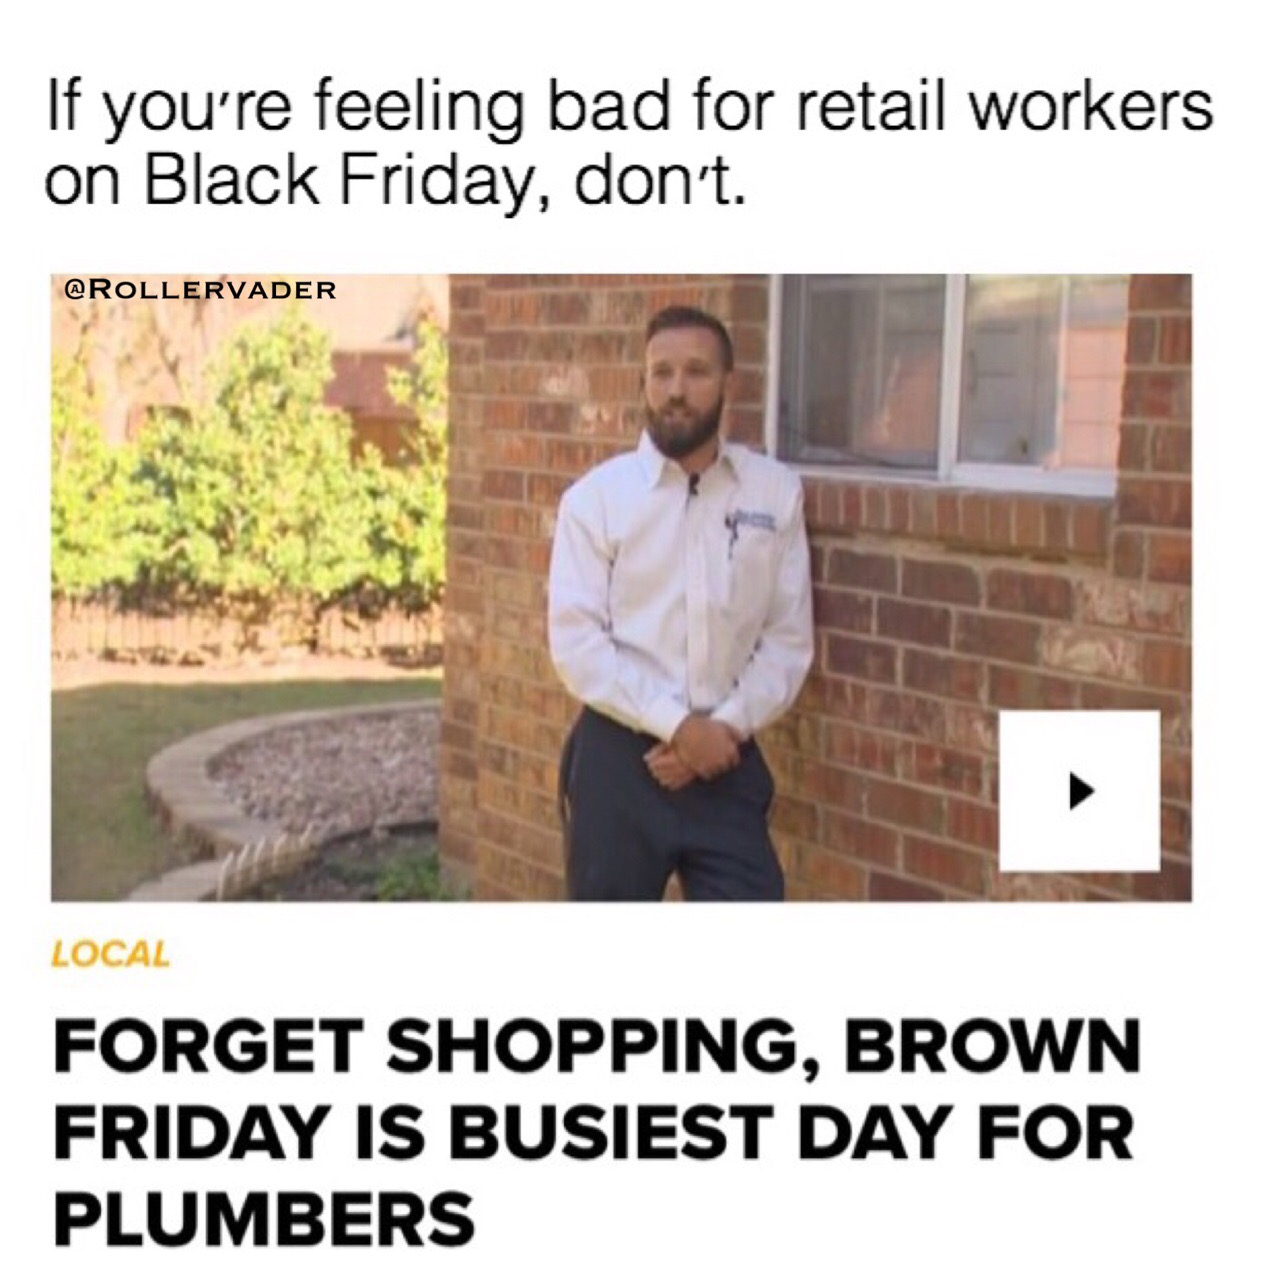 presentation - If you're feeling bad for retail workers on Black Friday, don't. Local Forget Shopping, Brown Friday Is Busiest Day For Plumbers